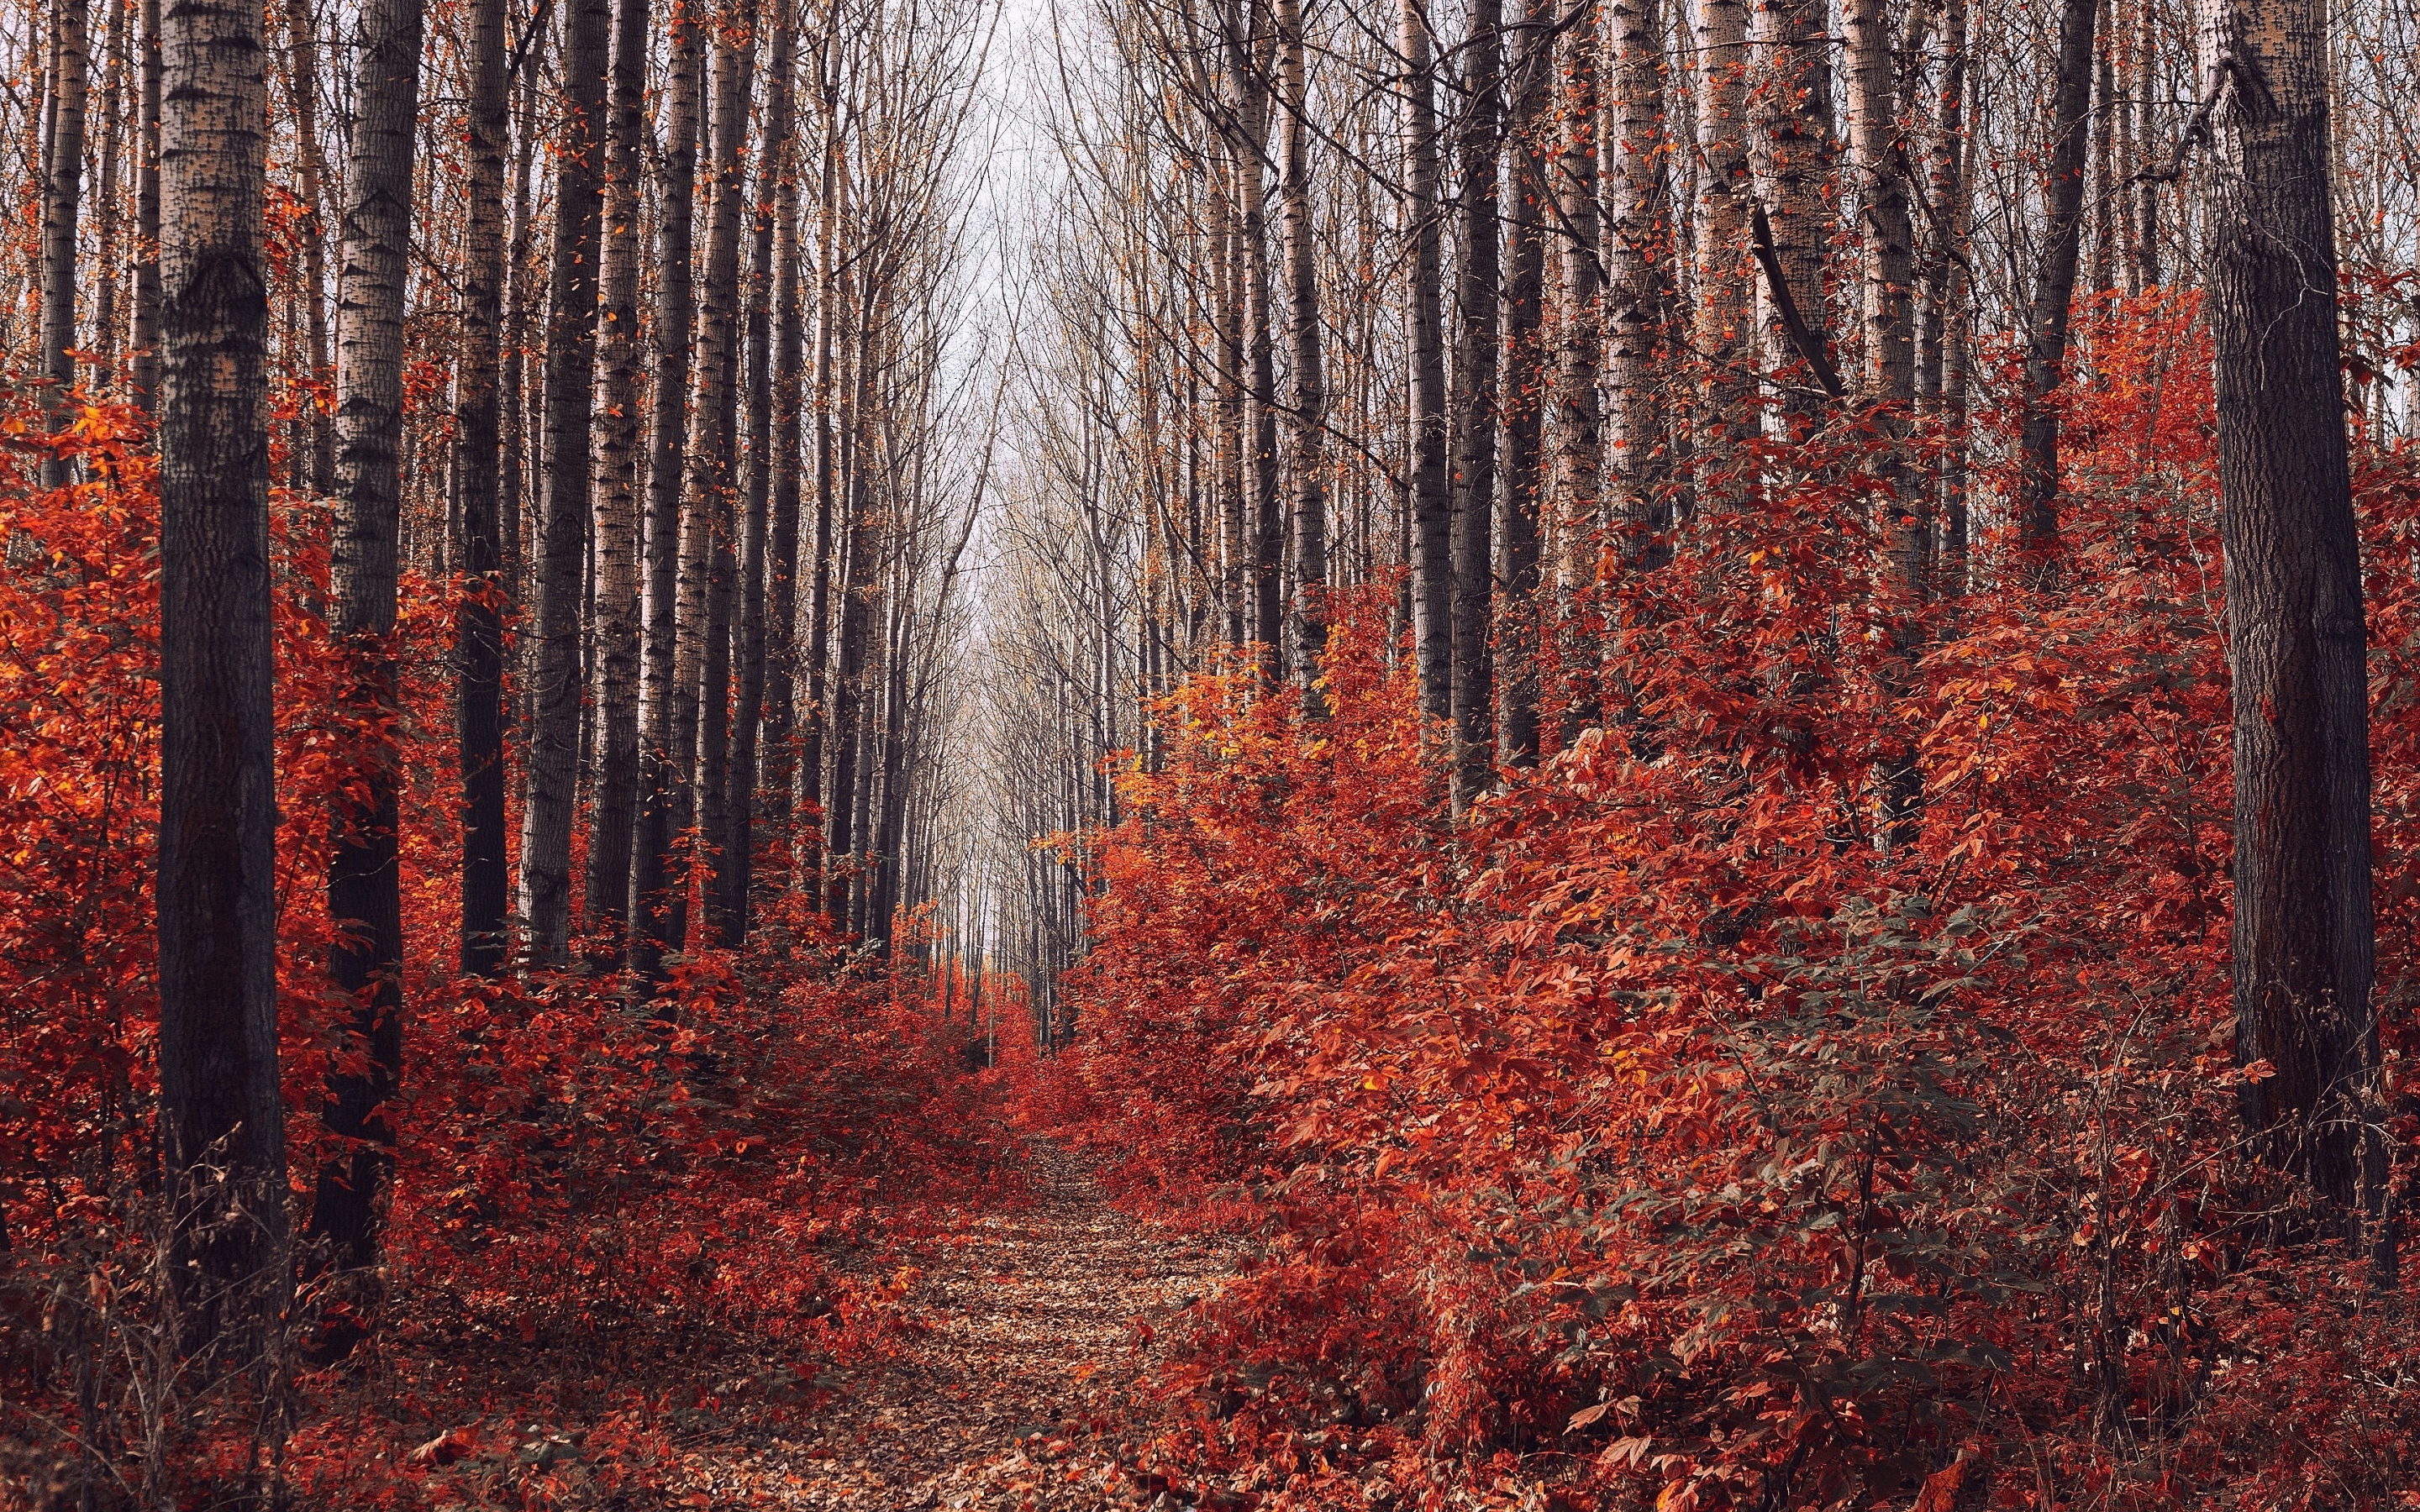 Wood, trees, forest, autumn, nature, 2880x1800 wallpaper.